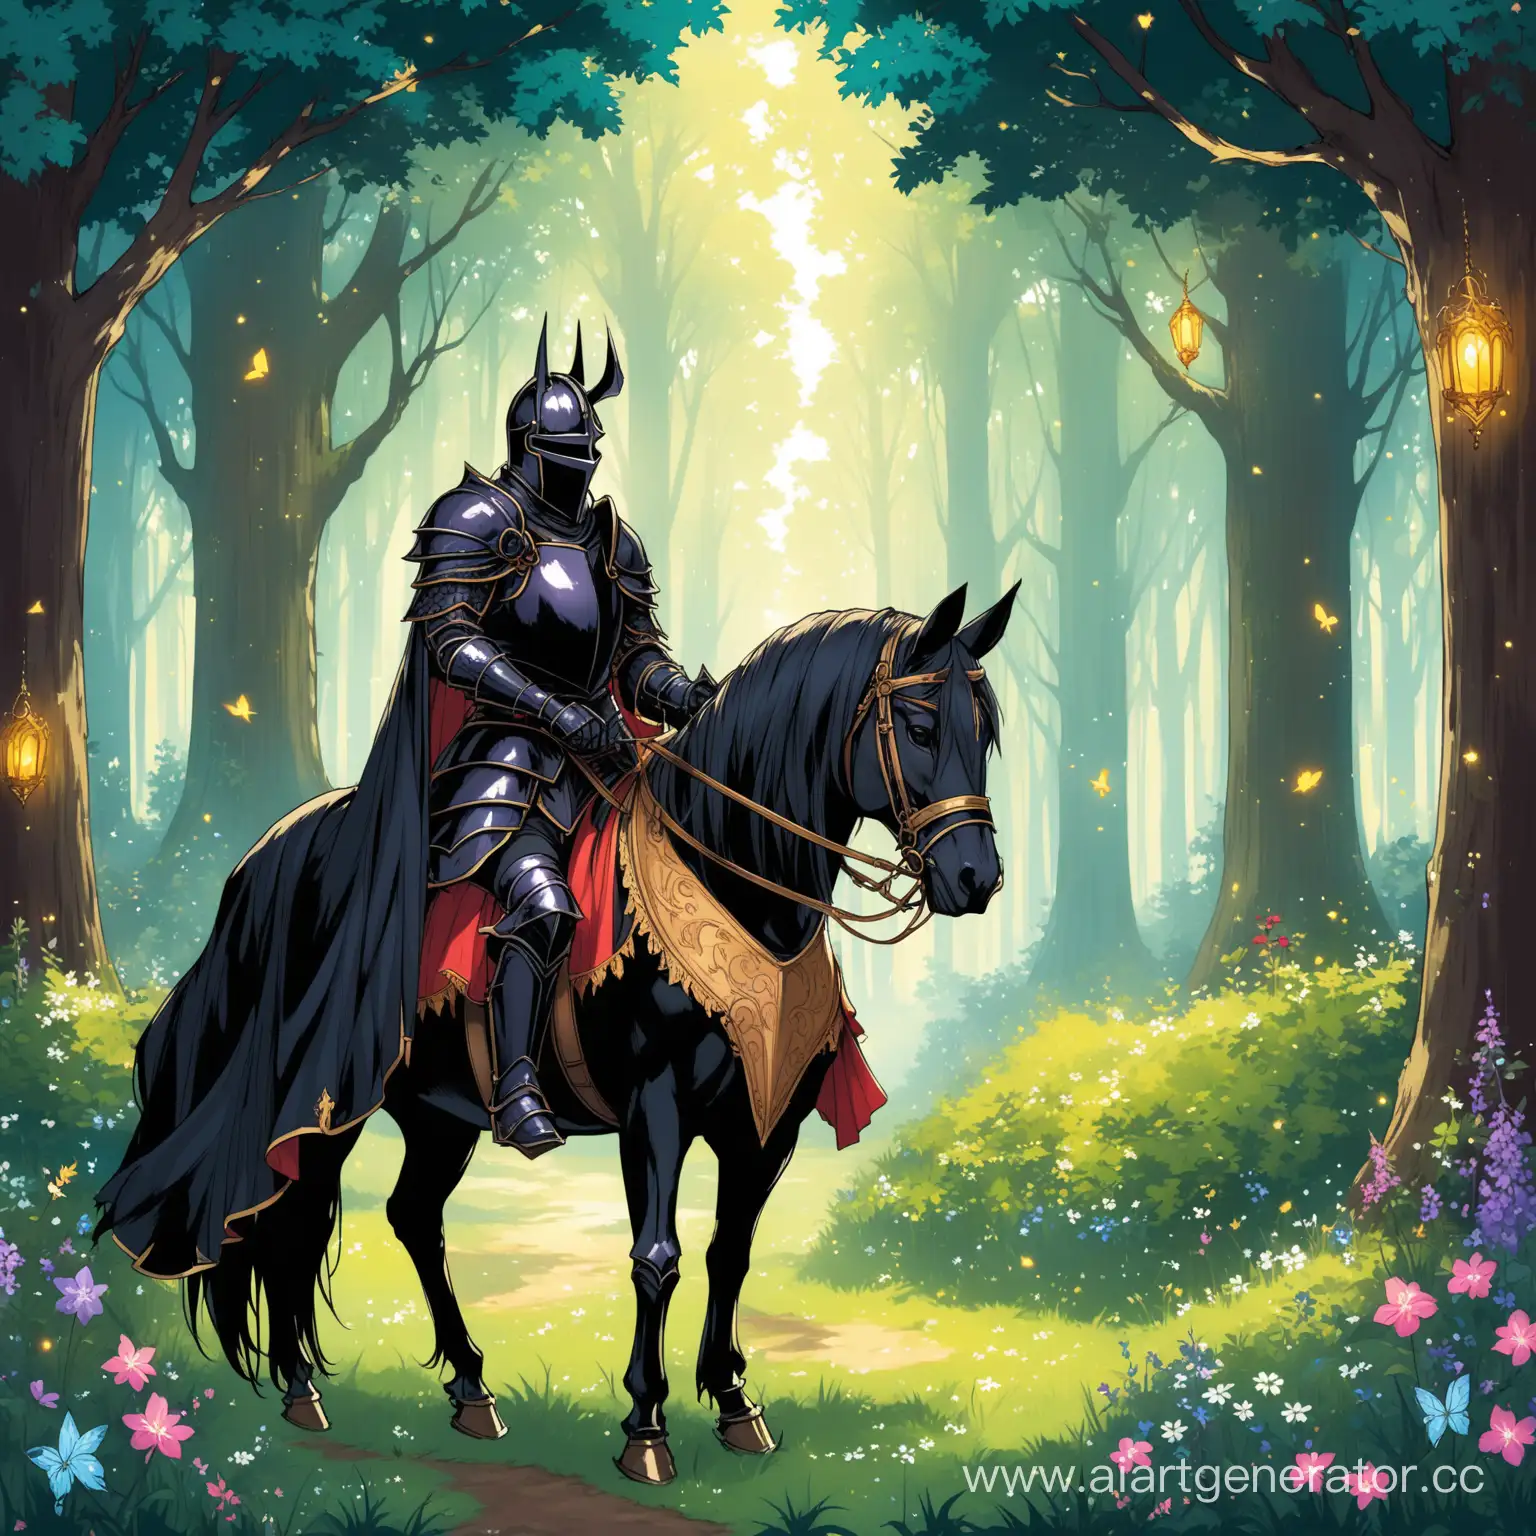 Mysterious-Black-Knight-Encounter-in-Enchanted-Forest